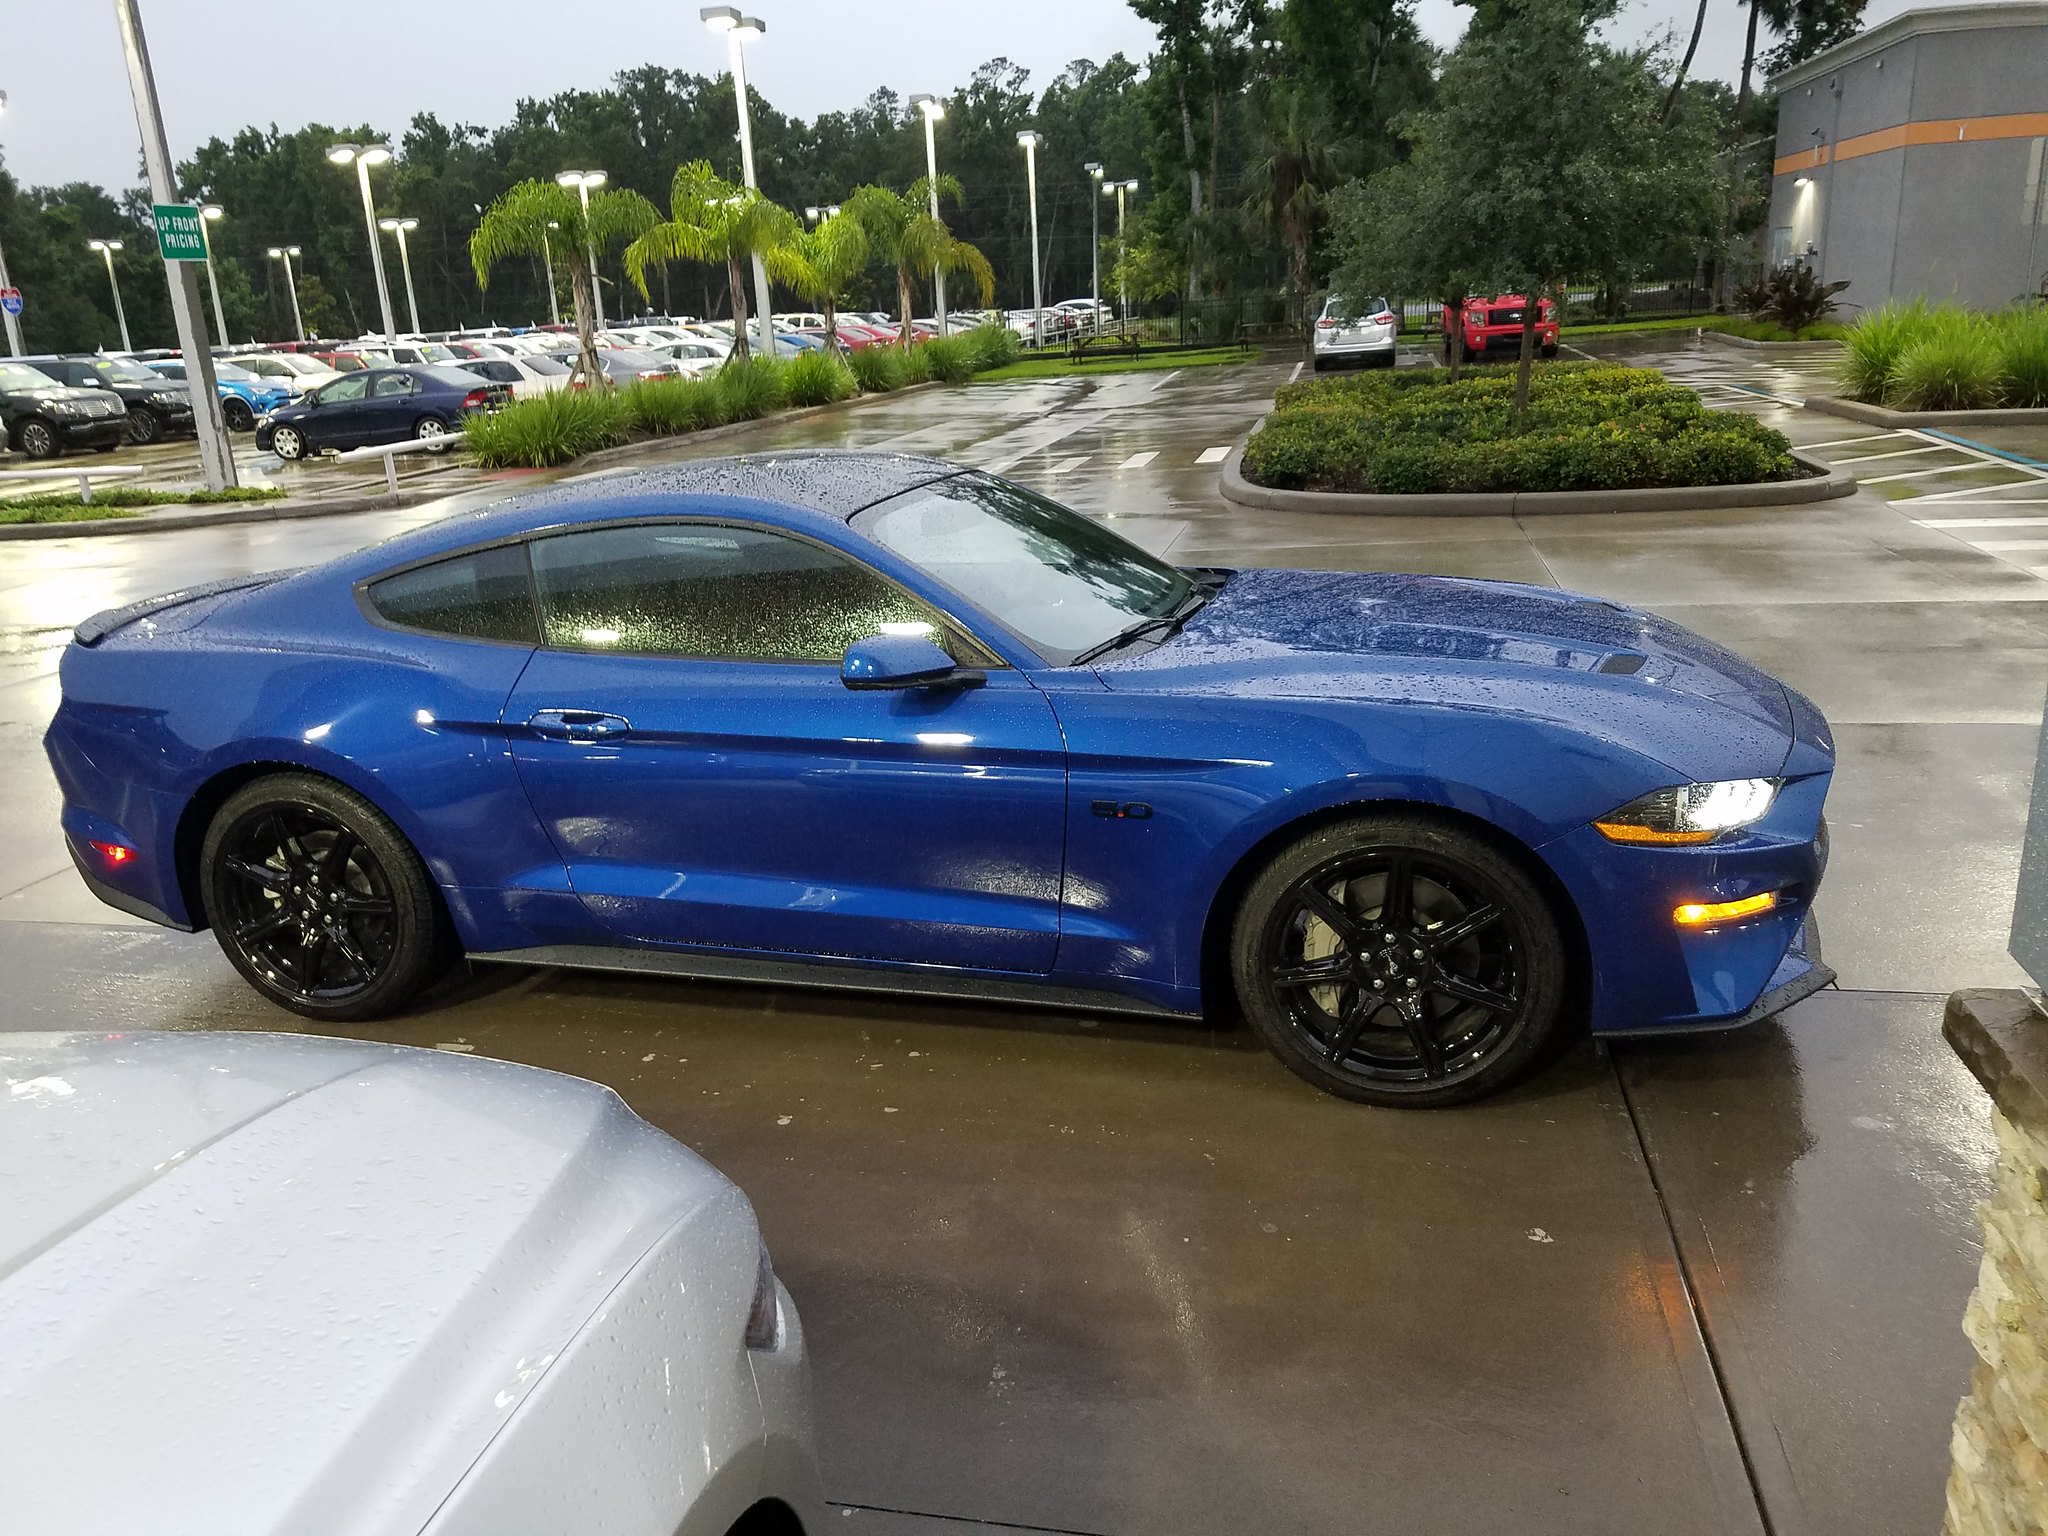 Our 2018 Mustang GT - Lightning Blue W/ Black Appearance Package |  SN95Forums The Only SN95 1994-2004 Dedicated Ford Mustang Community